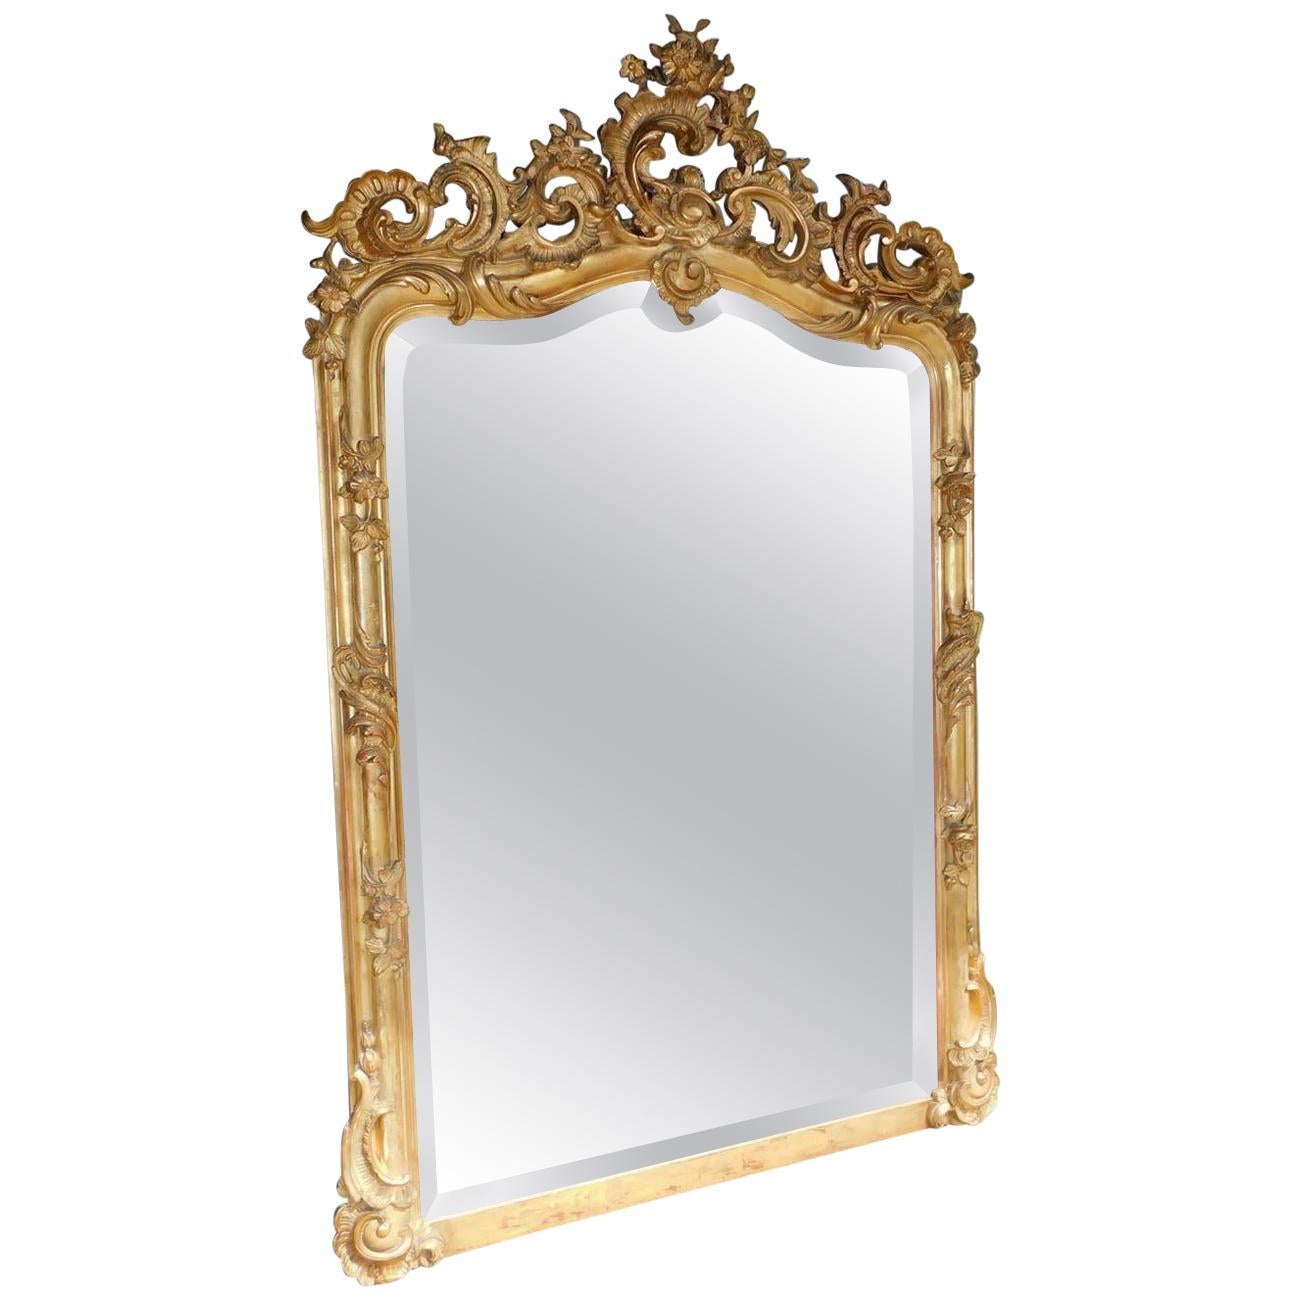 French Gilt Carved Wood and Gesso Foliage Wall Mirror with Beveled Glass C. 1820